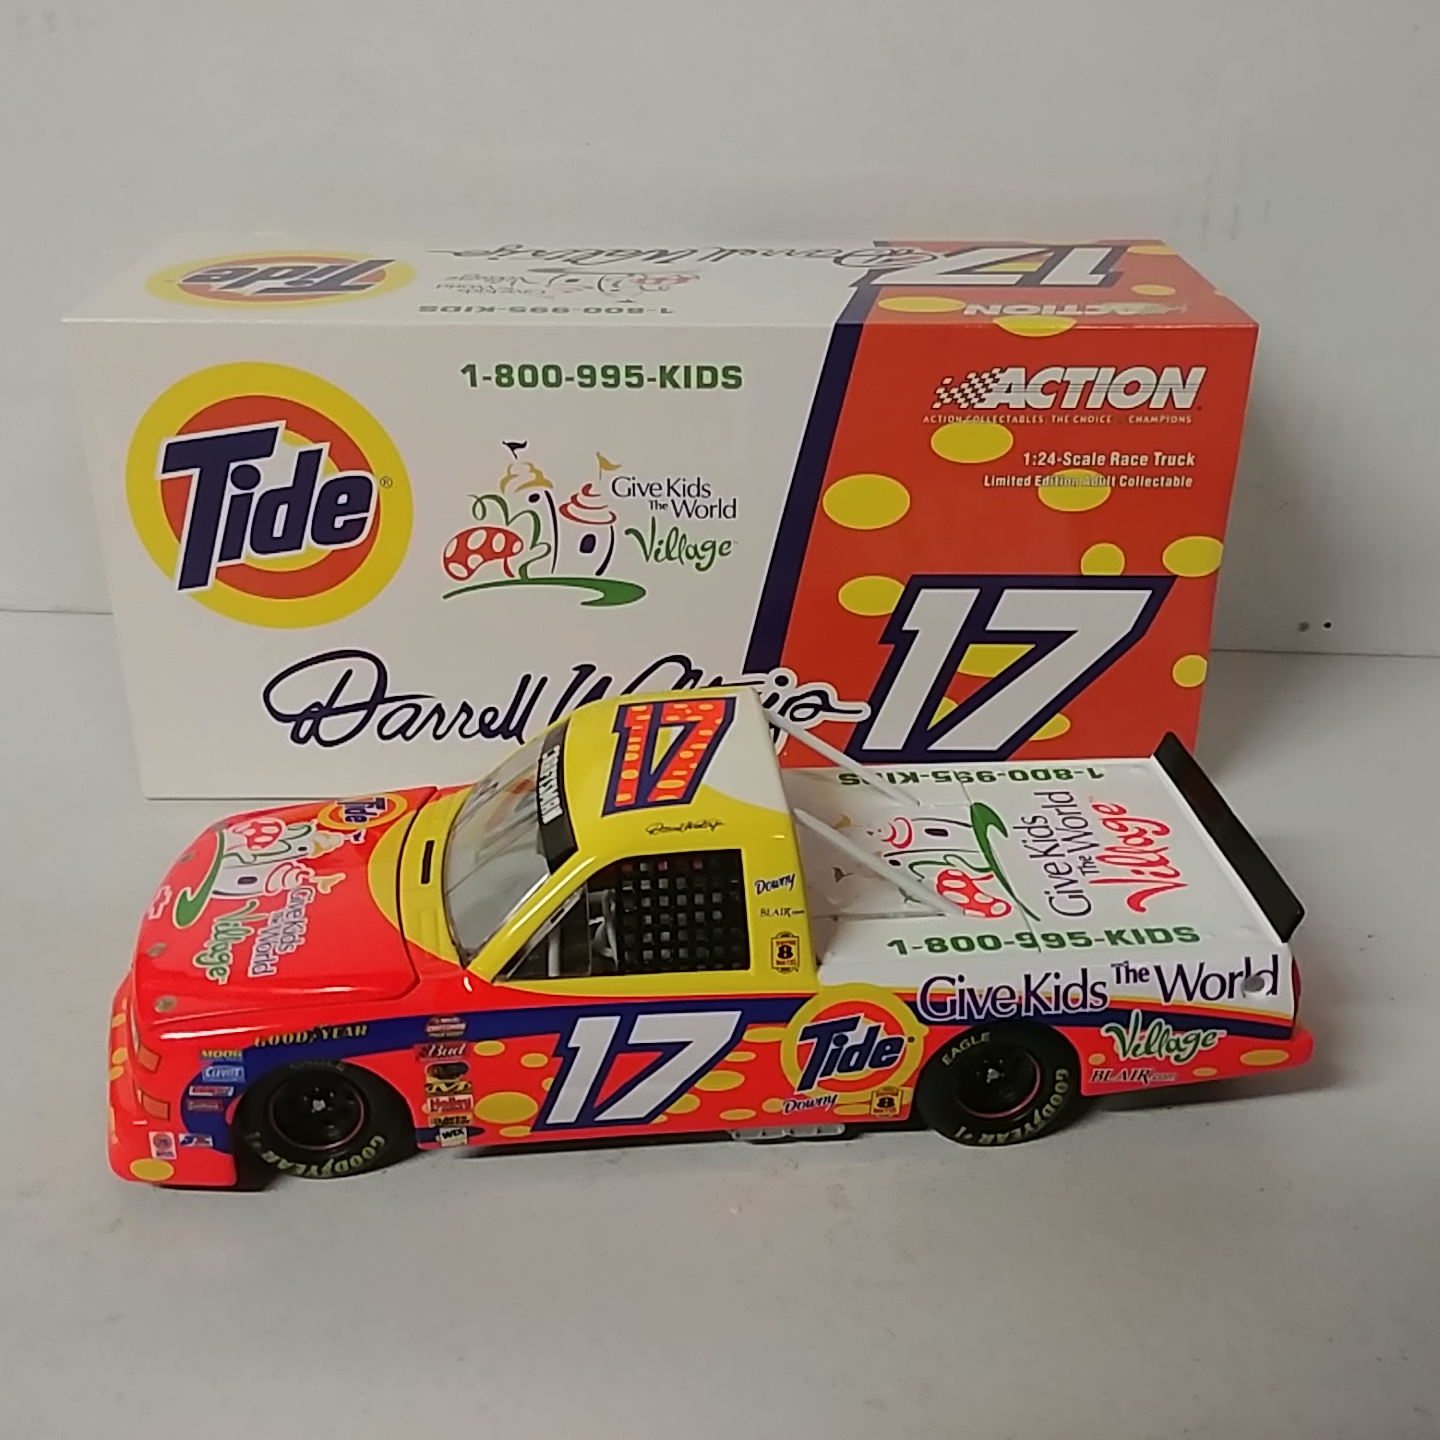 Darrell Waltrip 1/24th Tide "Give Kids the World" Chevy Race Truck